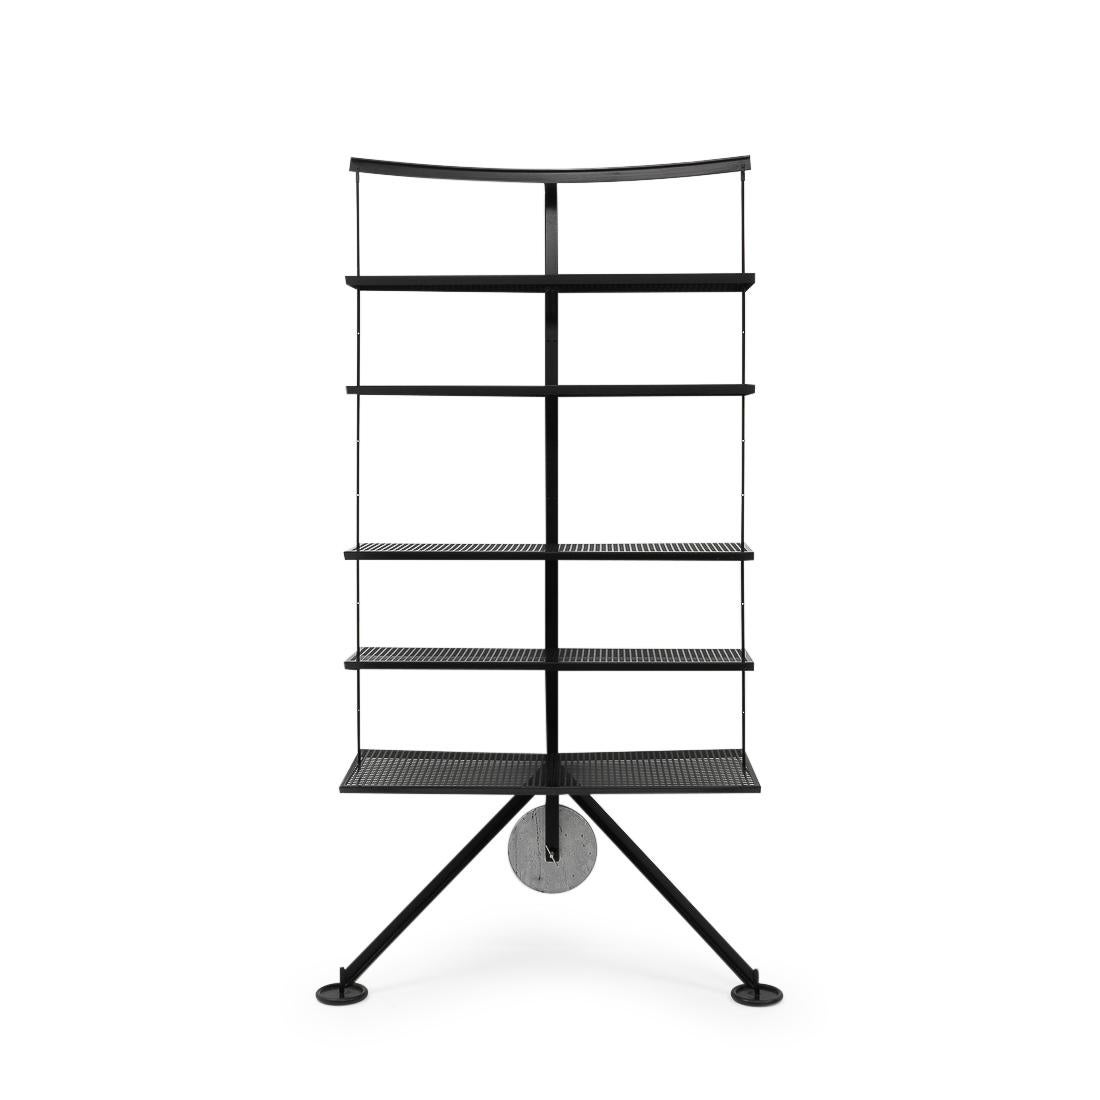 A 1980s book shelf designed by Carlo Forcolini for Alias, inspired by temple doors in Japan and China. This version is no longer in production. 

The Ran bookcase consists of five perforated black metal shelves, adjustable in height. It is